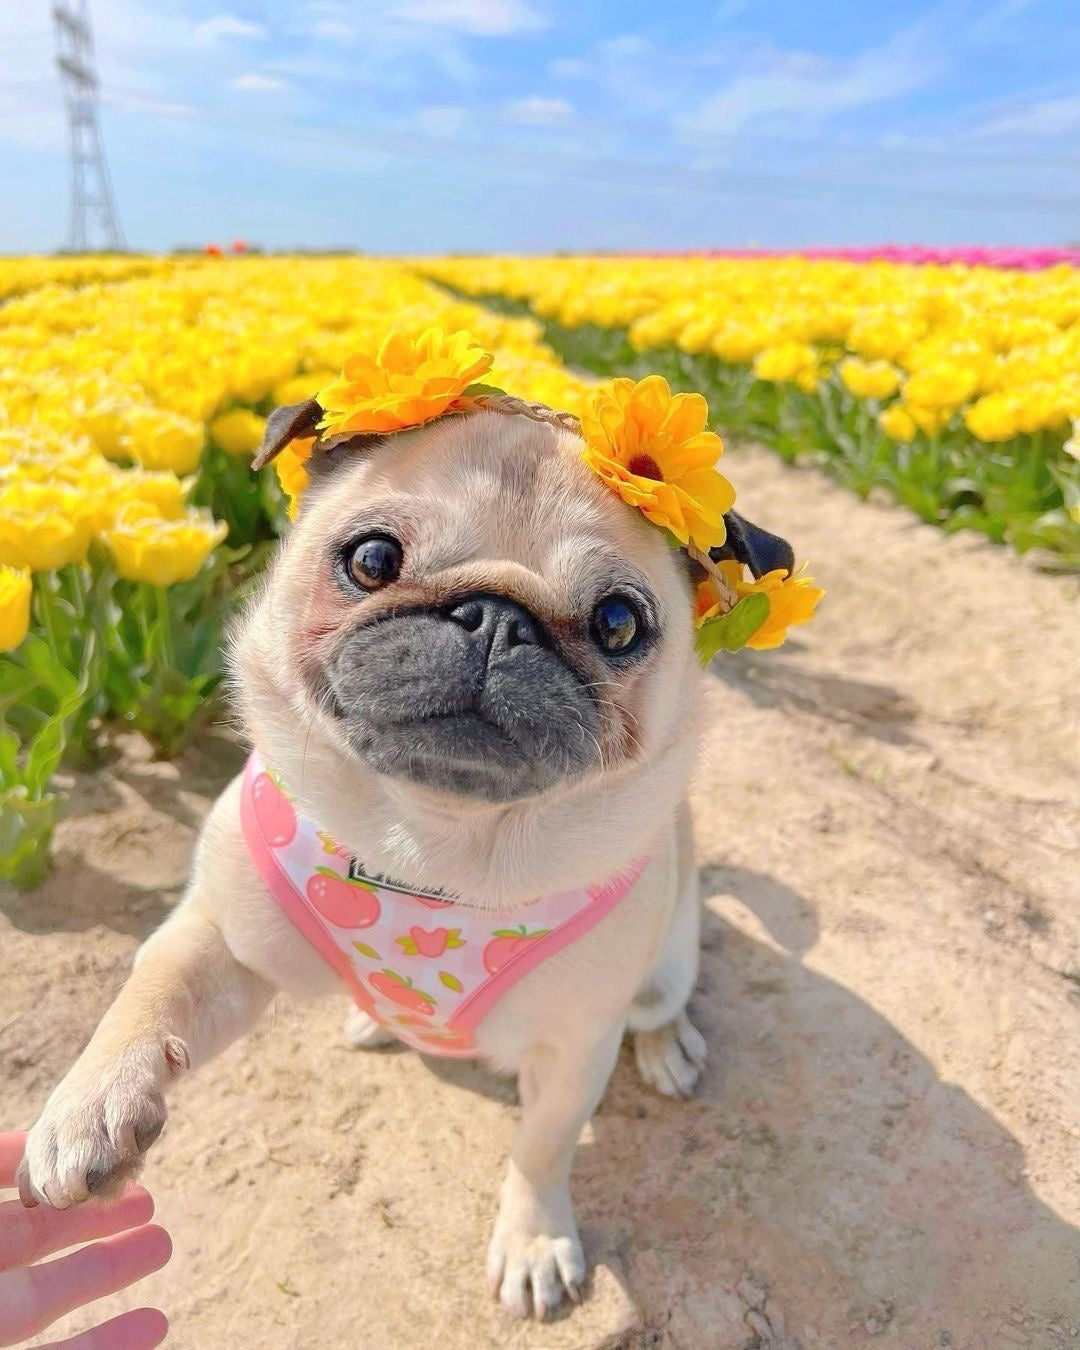 Cutest Animal Videos Will Make You Smile